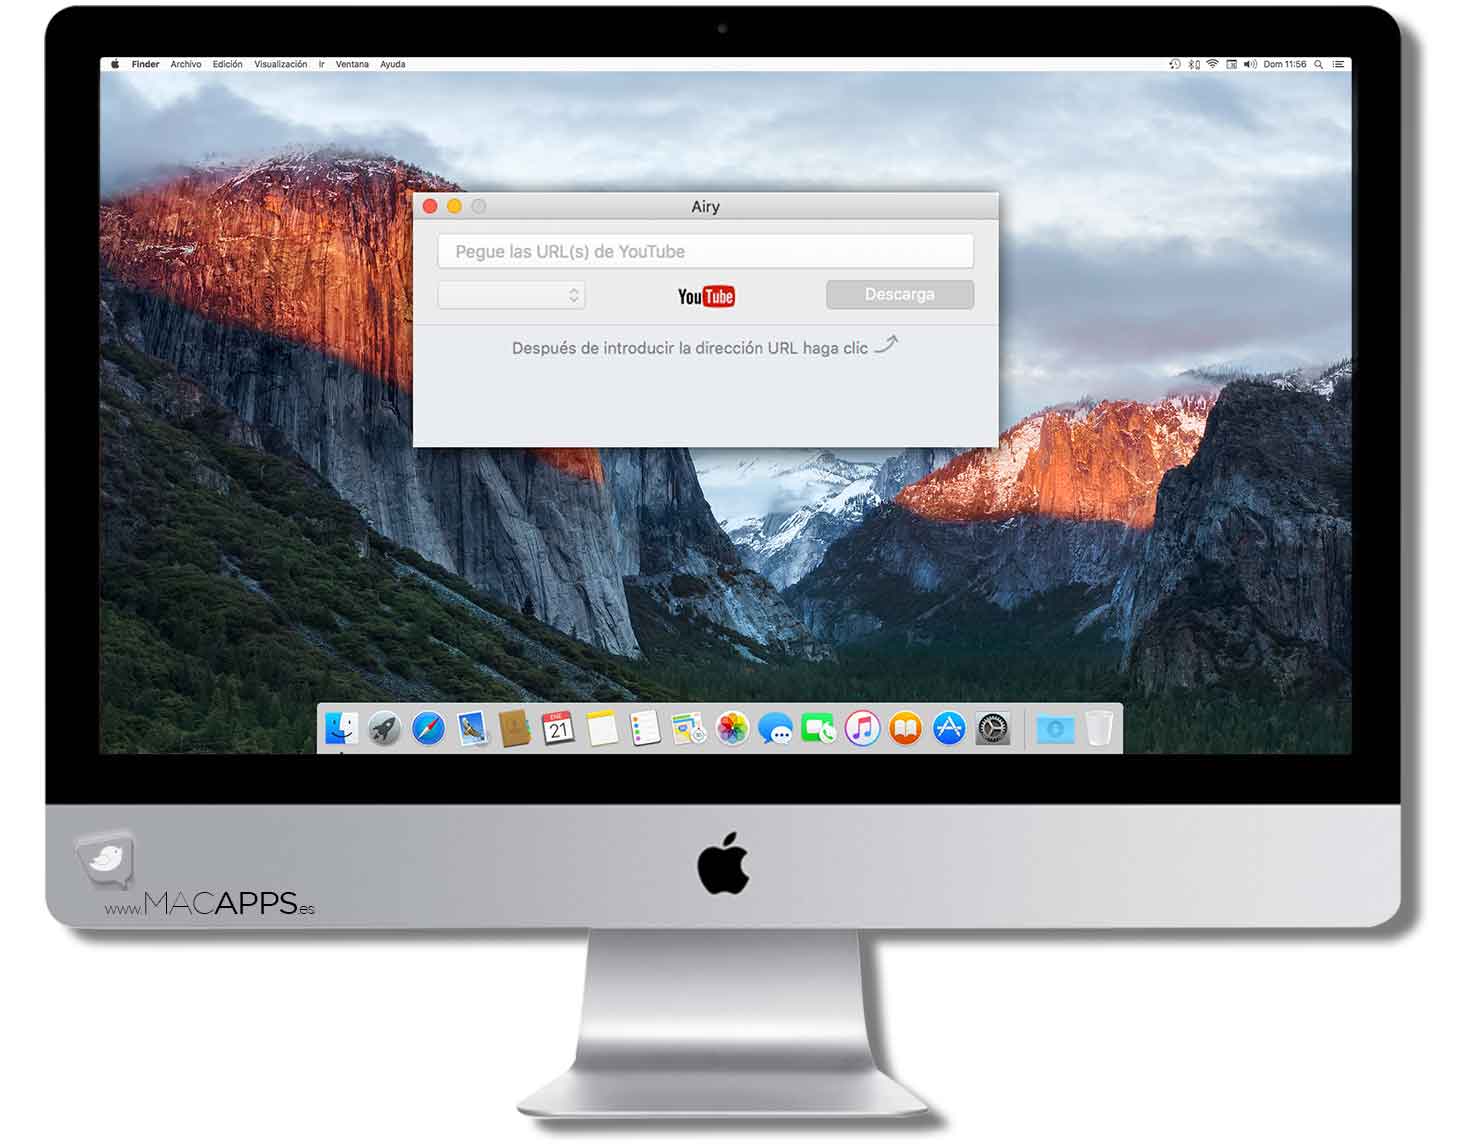 airy youtube downloader for mac youtube